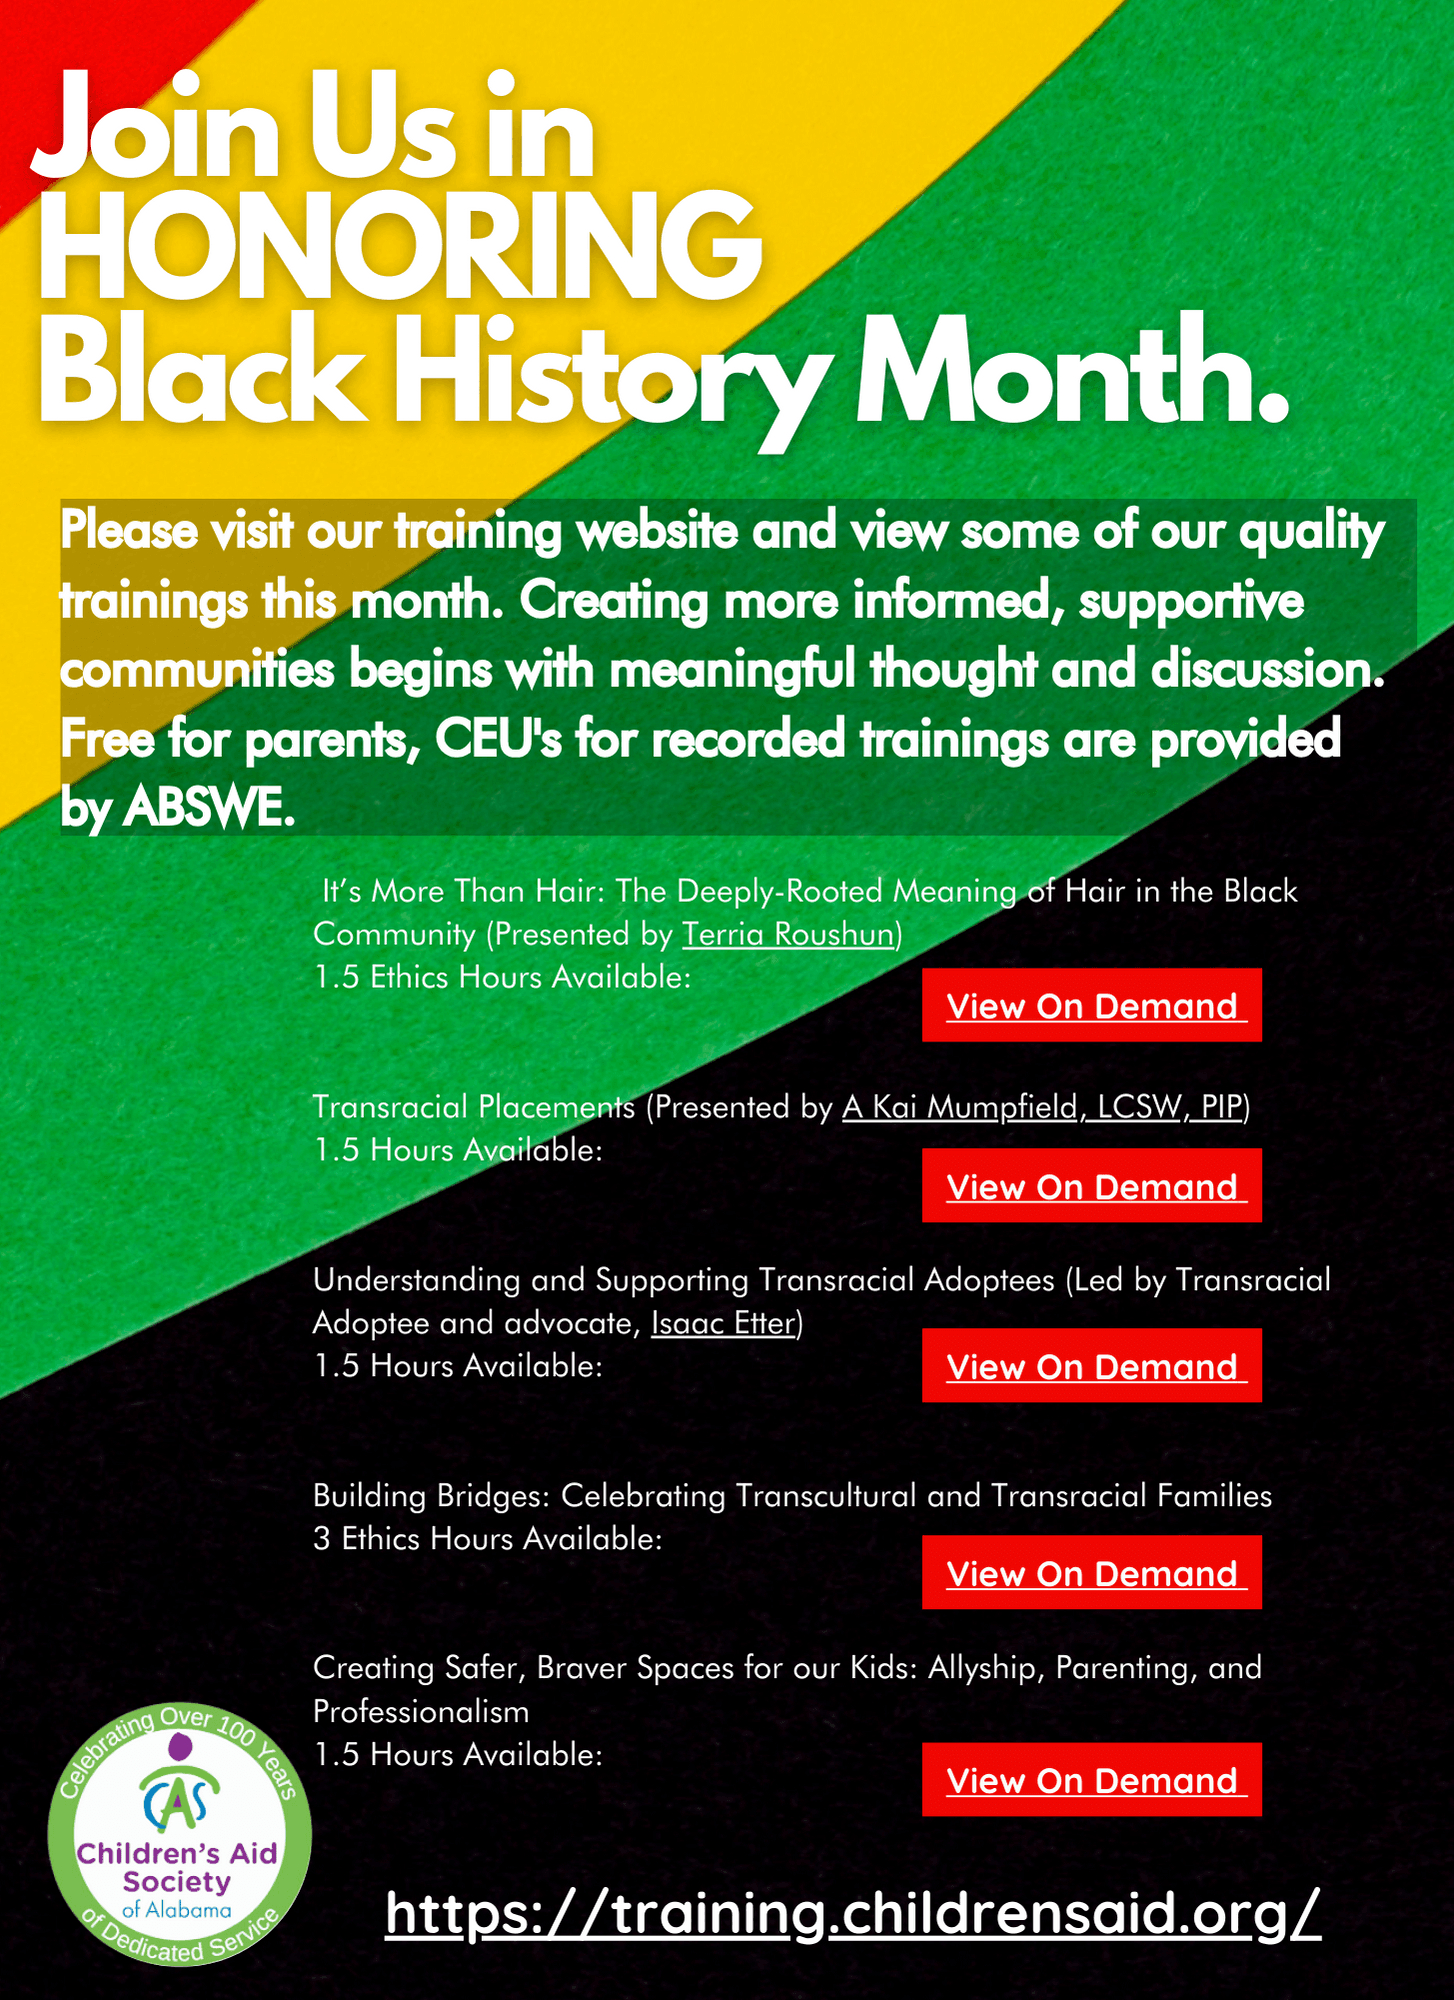 Join Children's Aid Society of Alabama in Honoring Black History Month